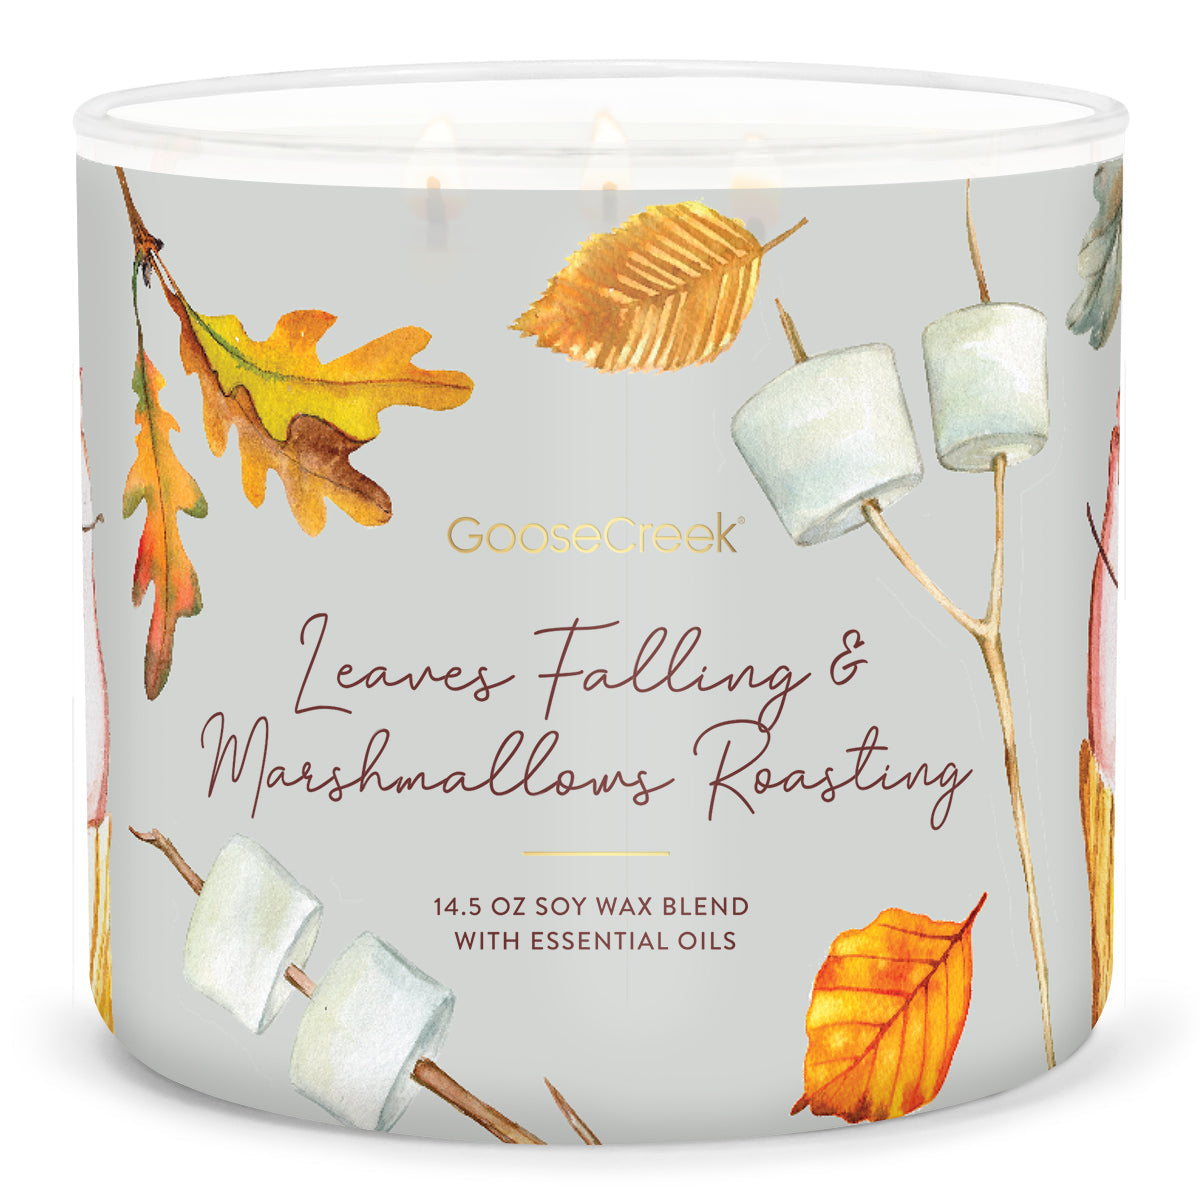 Leaves Falling & Marshmallows Roasting Large 3-Wick Candle